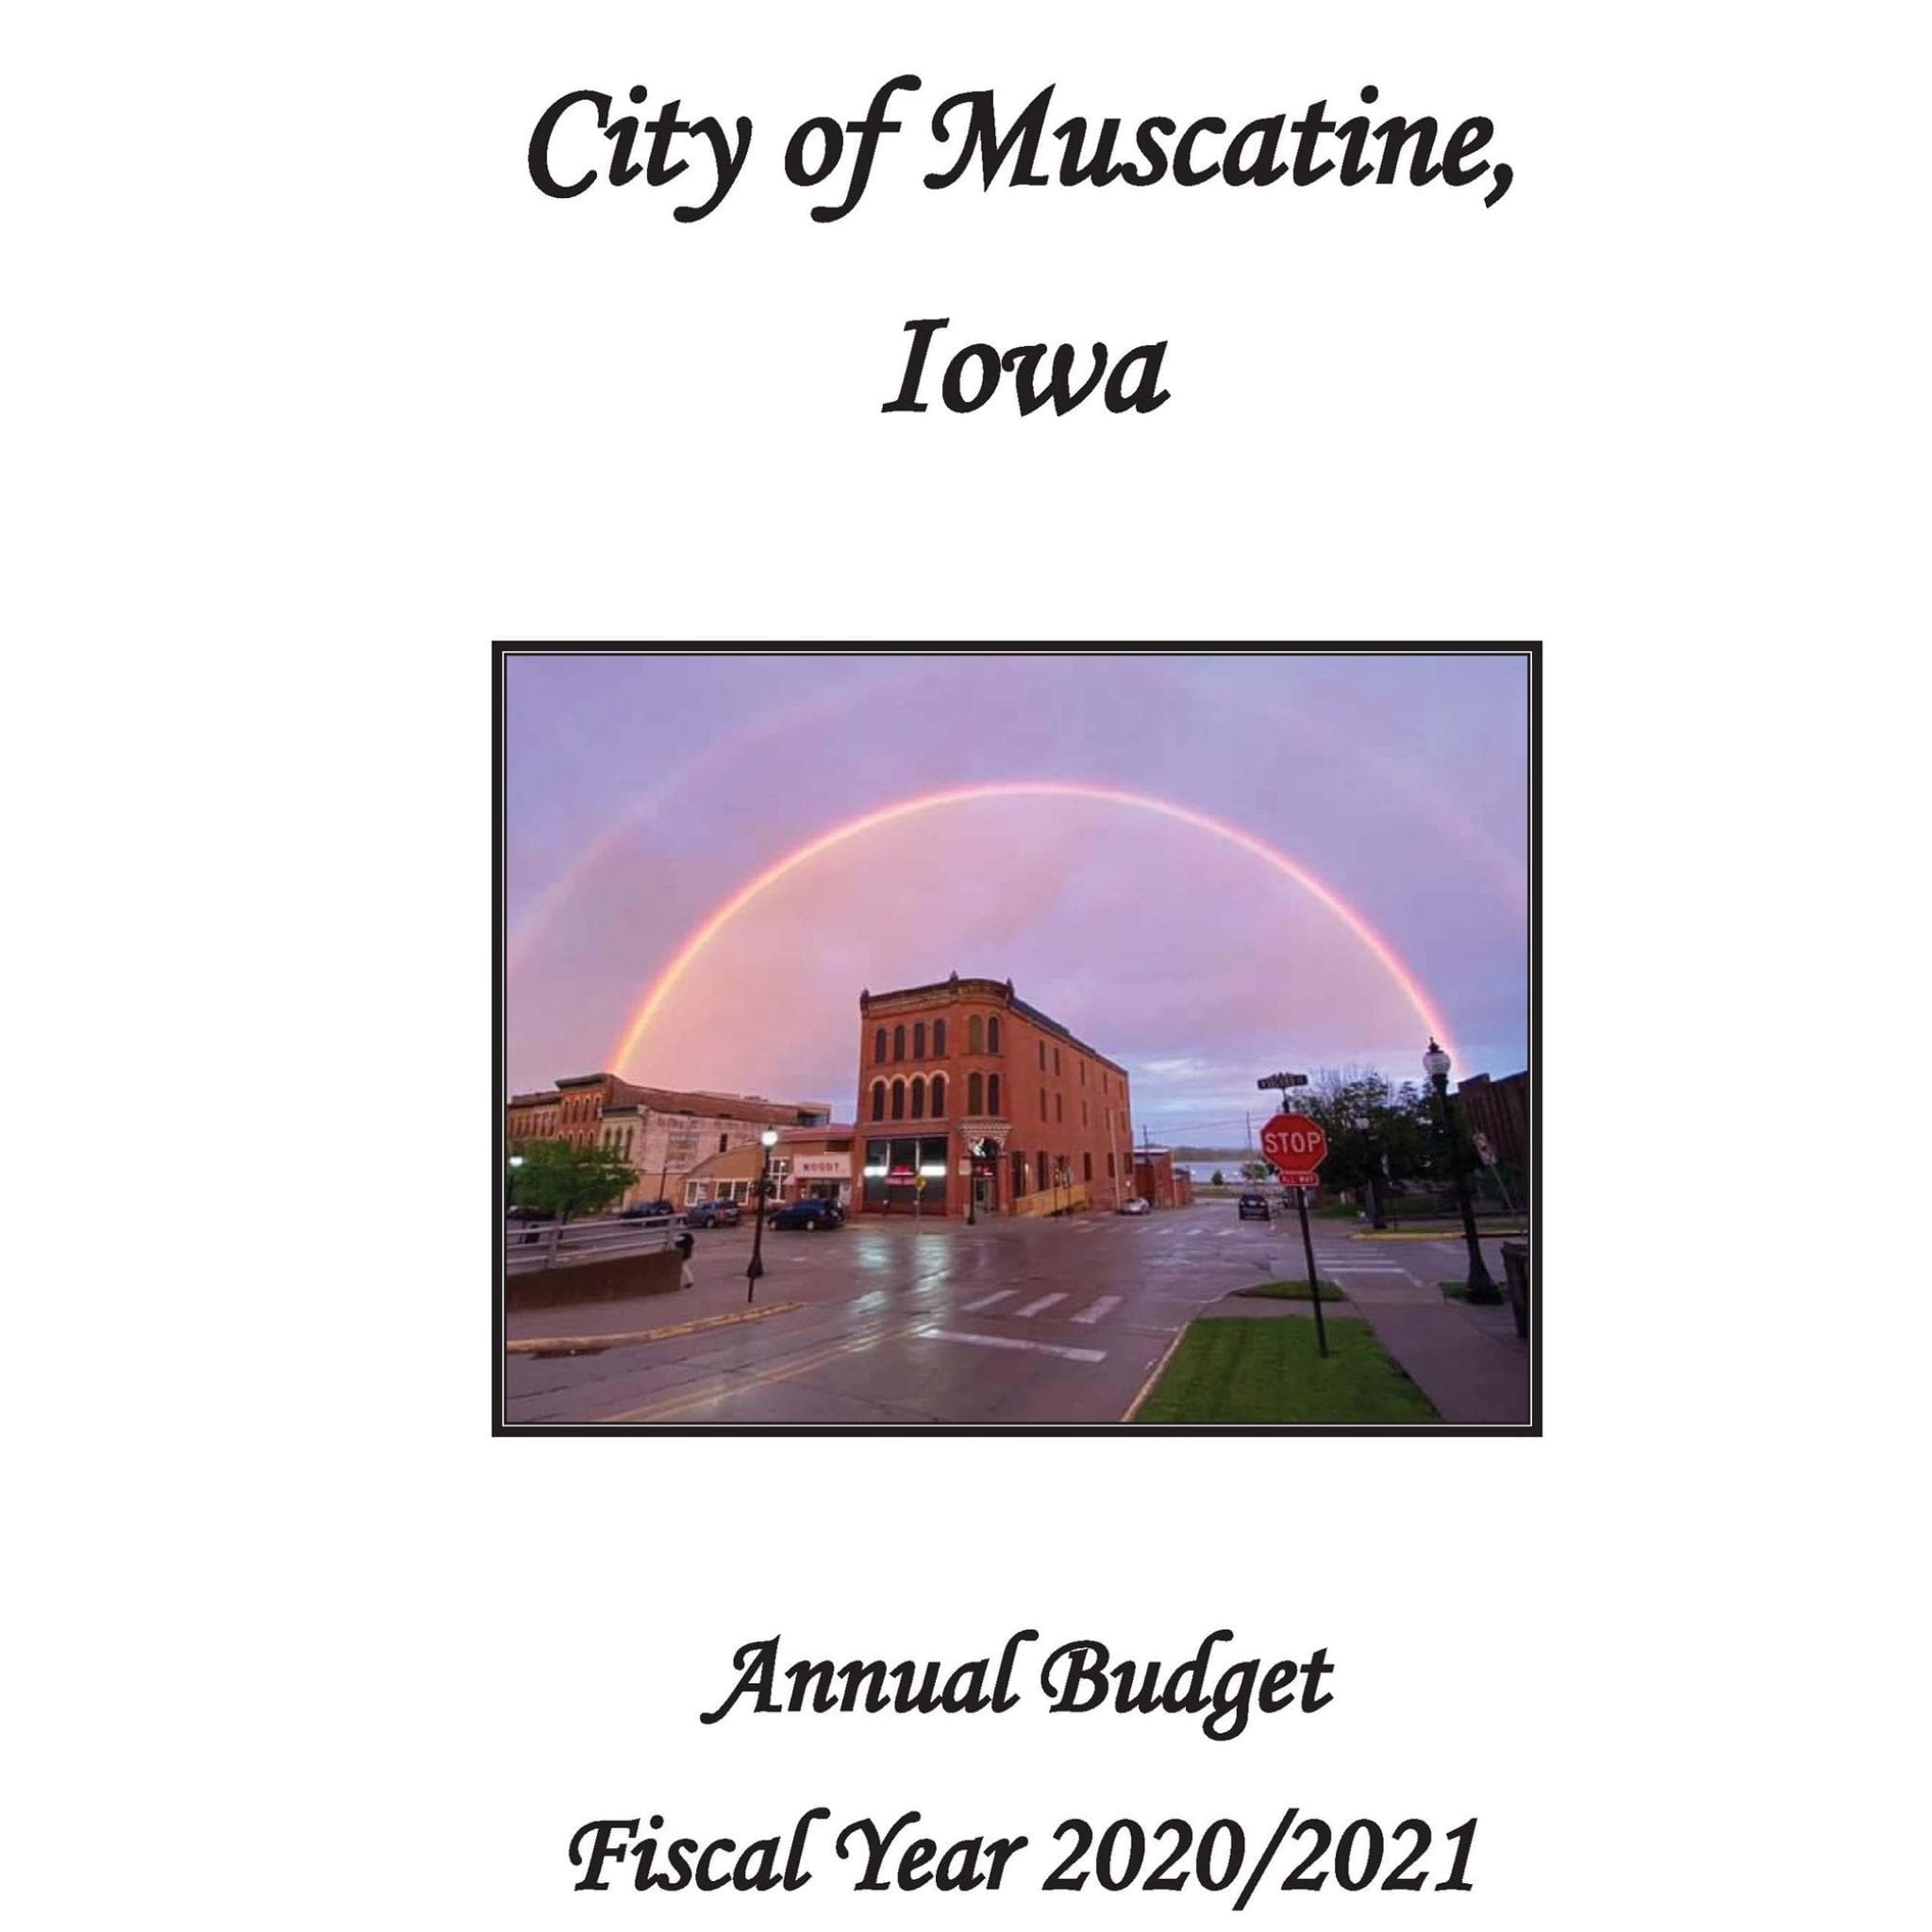 City of Muscatine FY 2020-2021 budget available to view